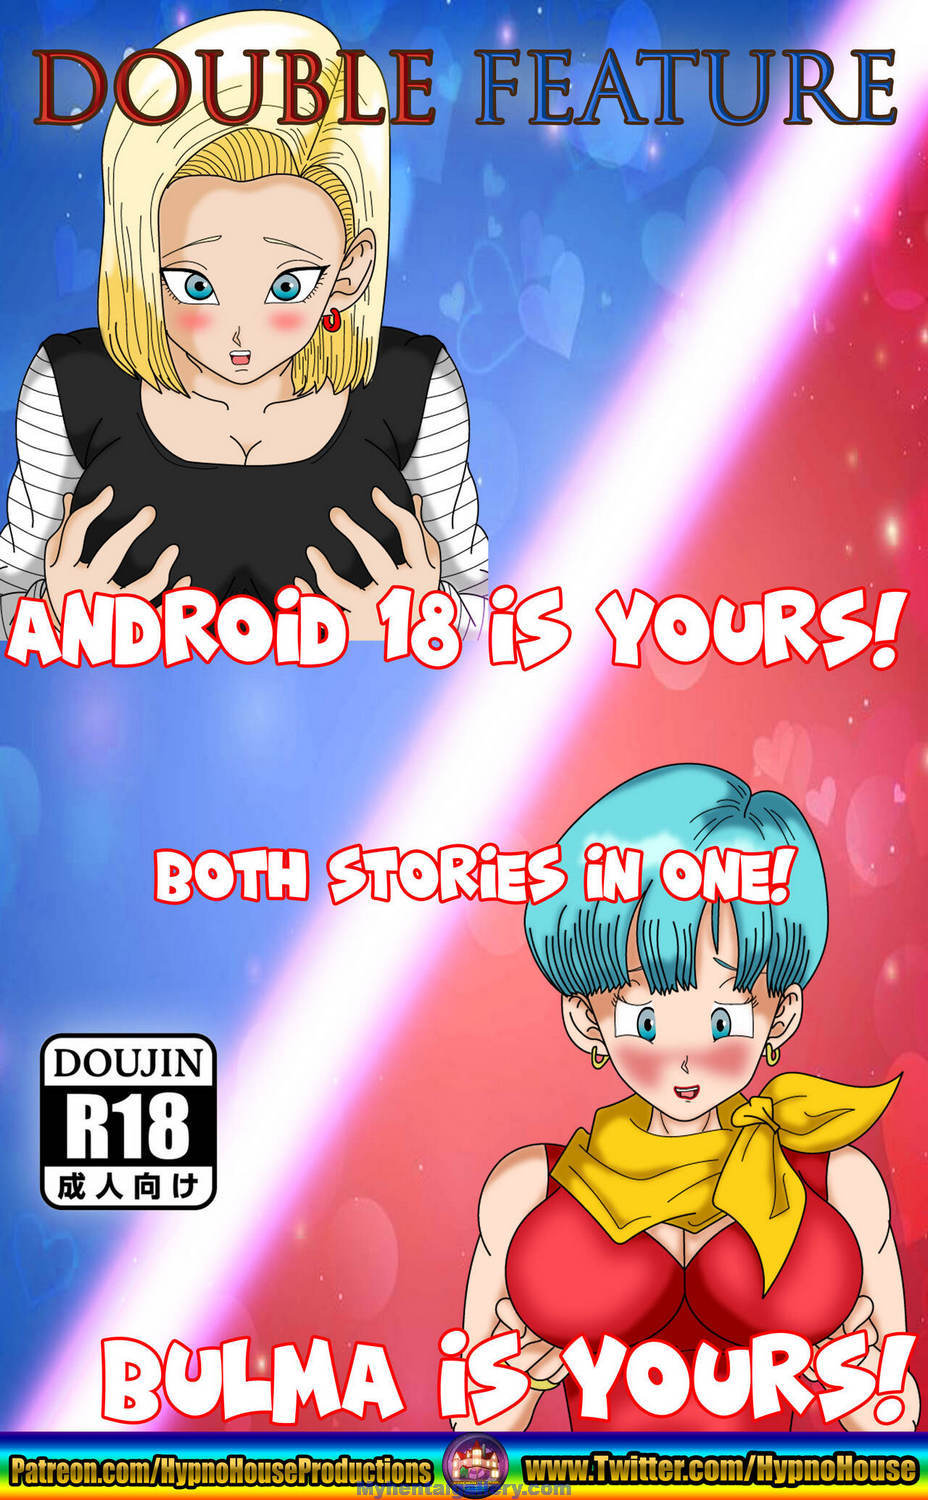 Double Feature - Android 18 & Bulma is Yours!